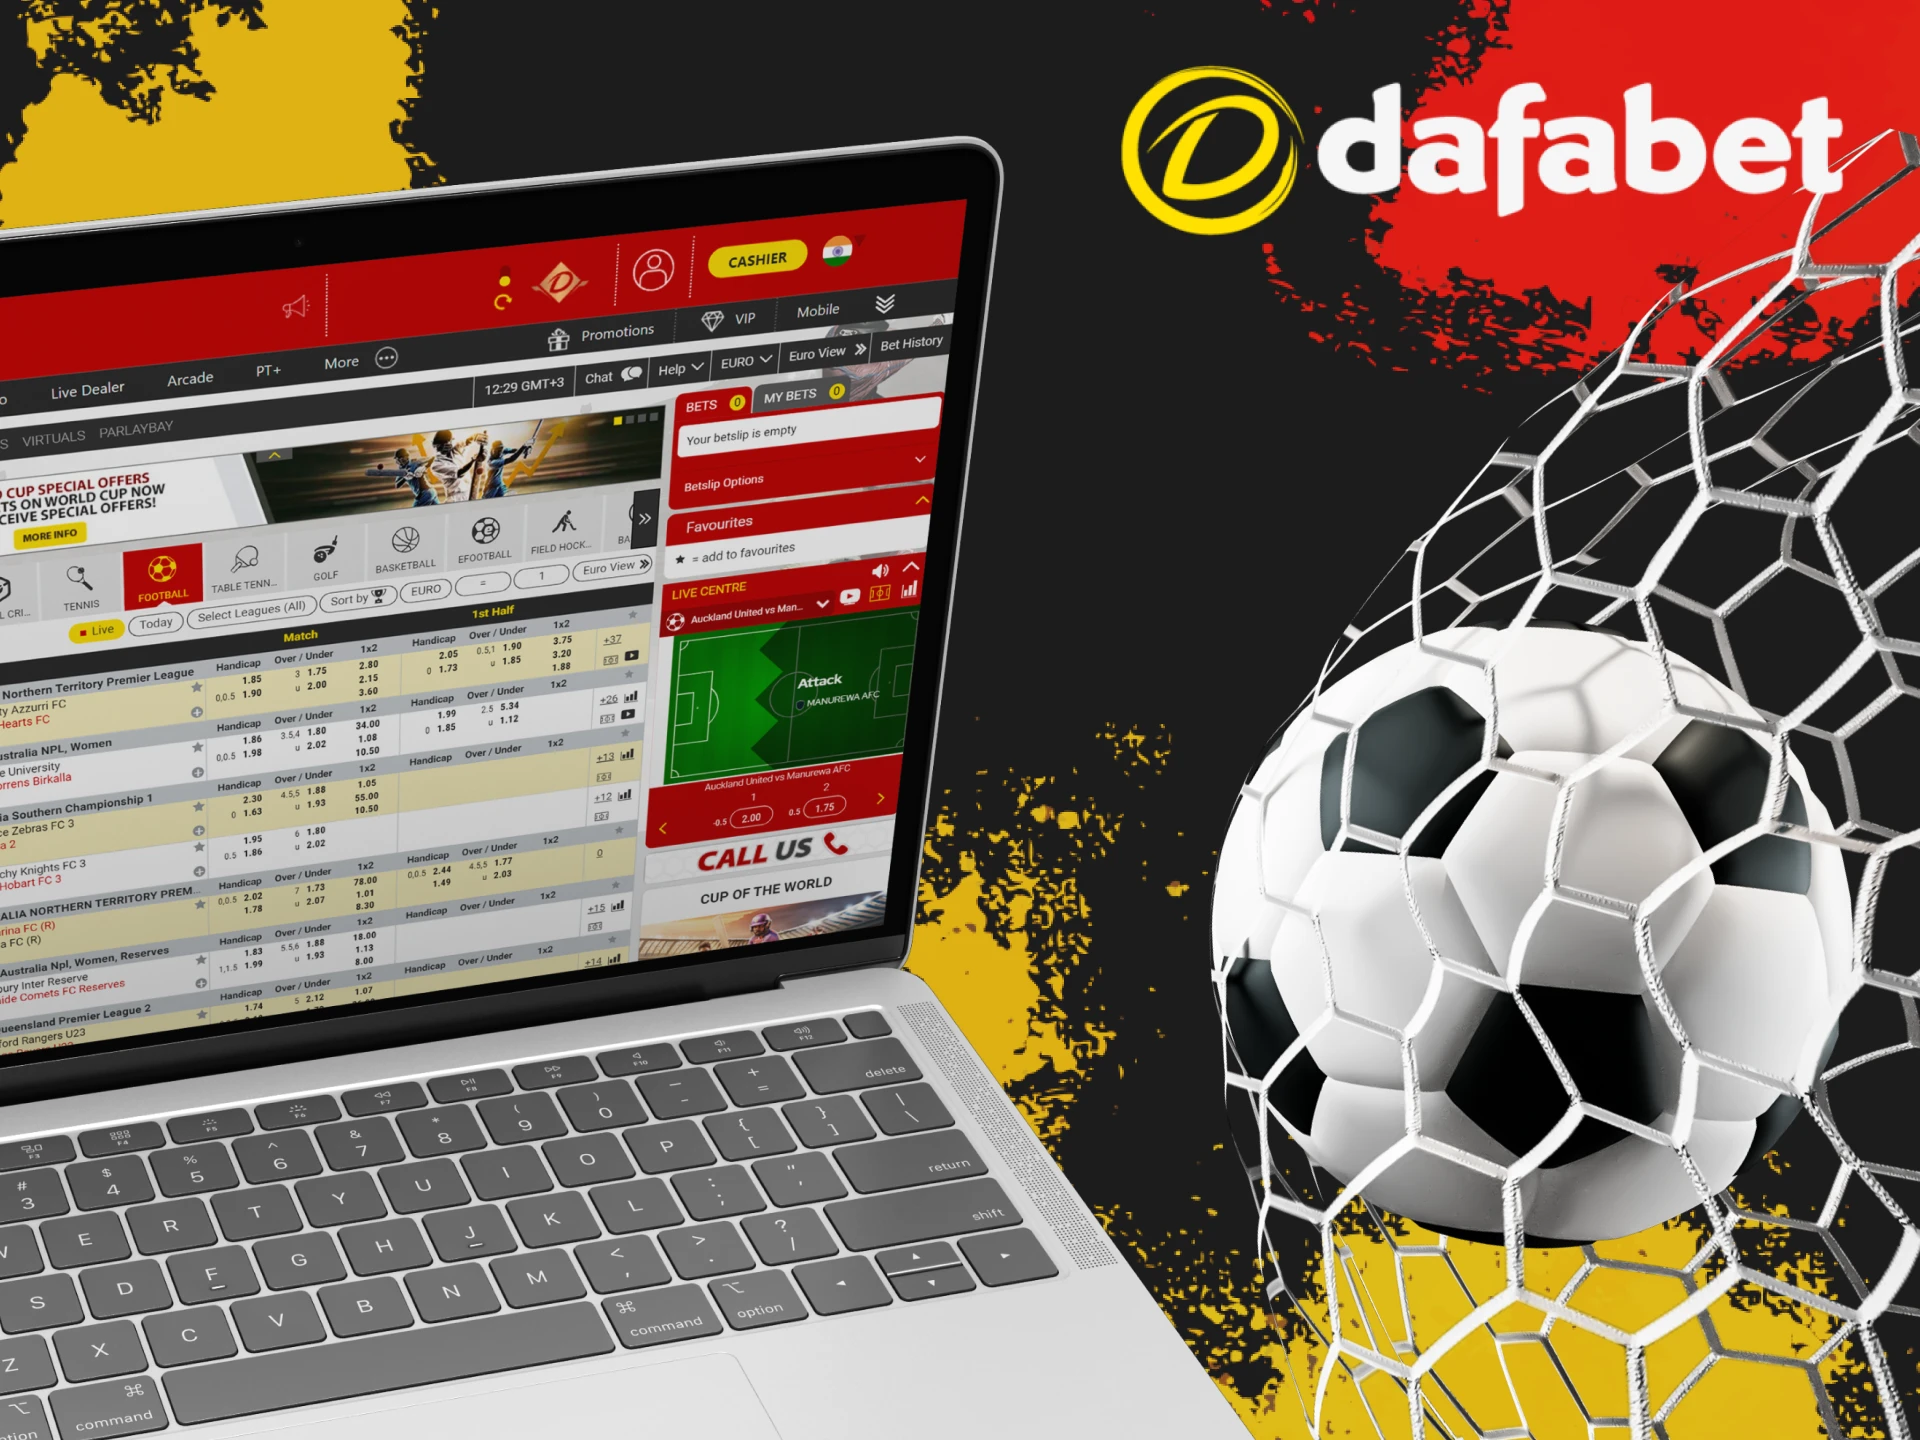 Dafabet has several football betting sections, check them out.